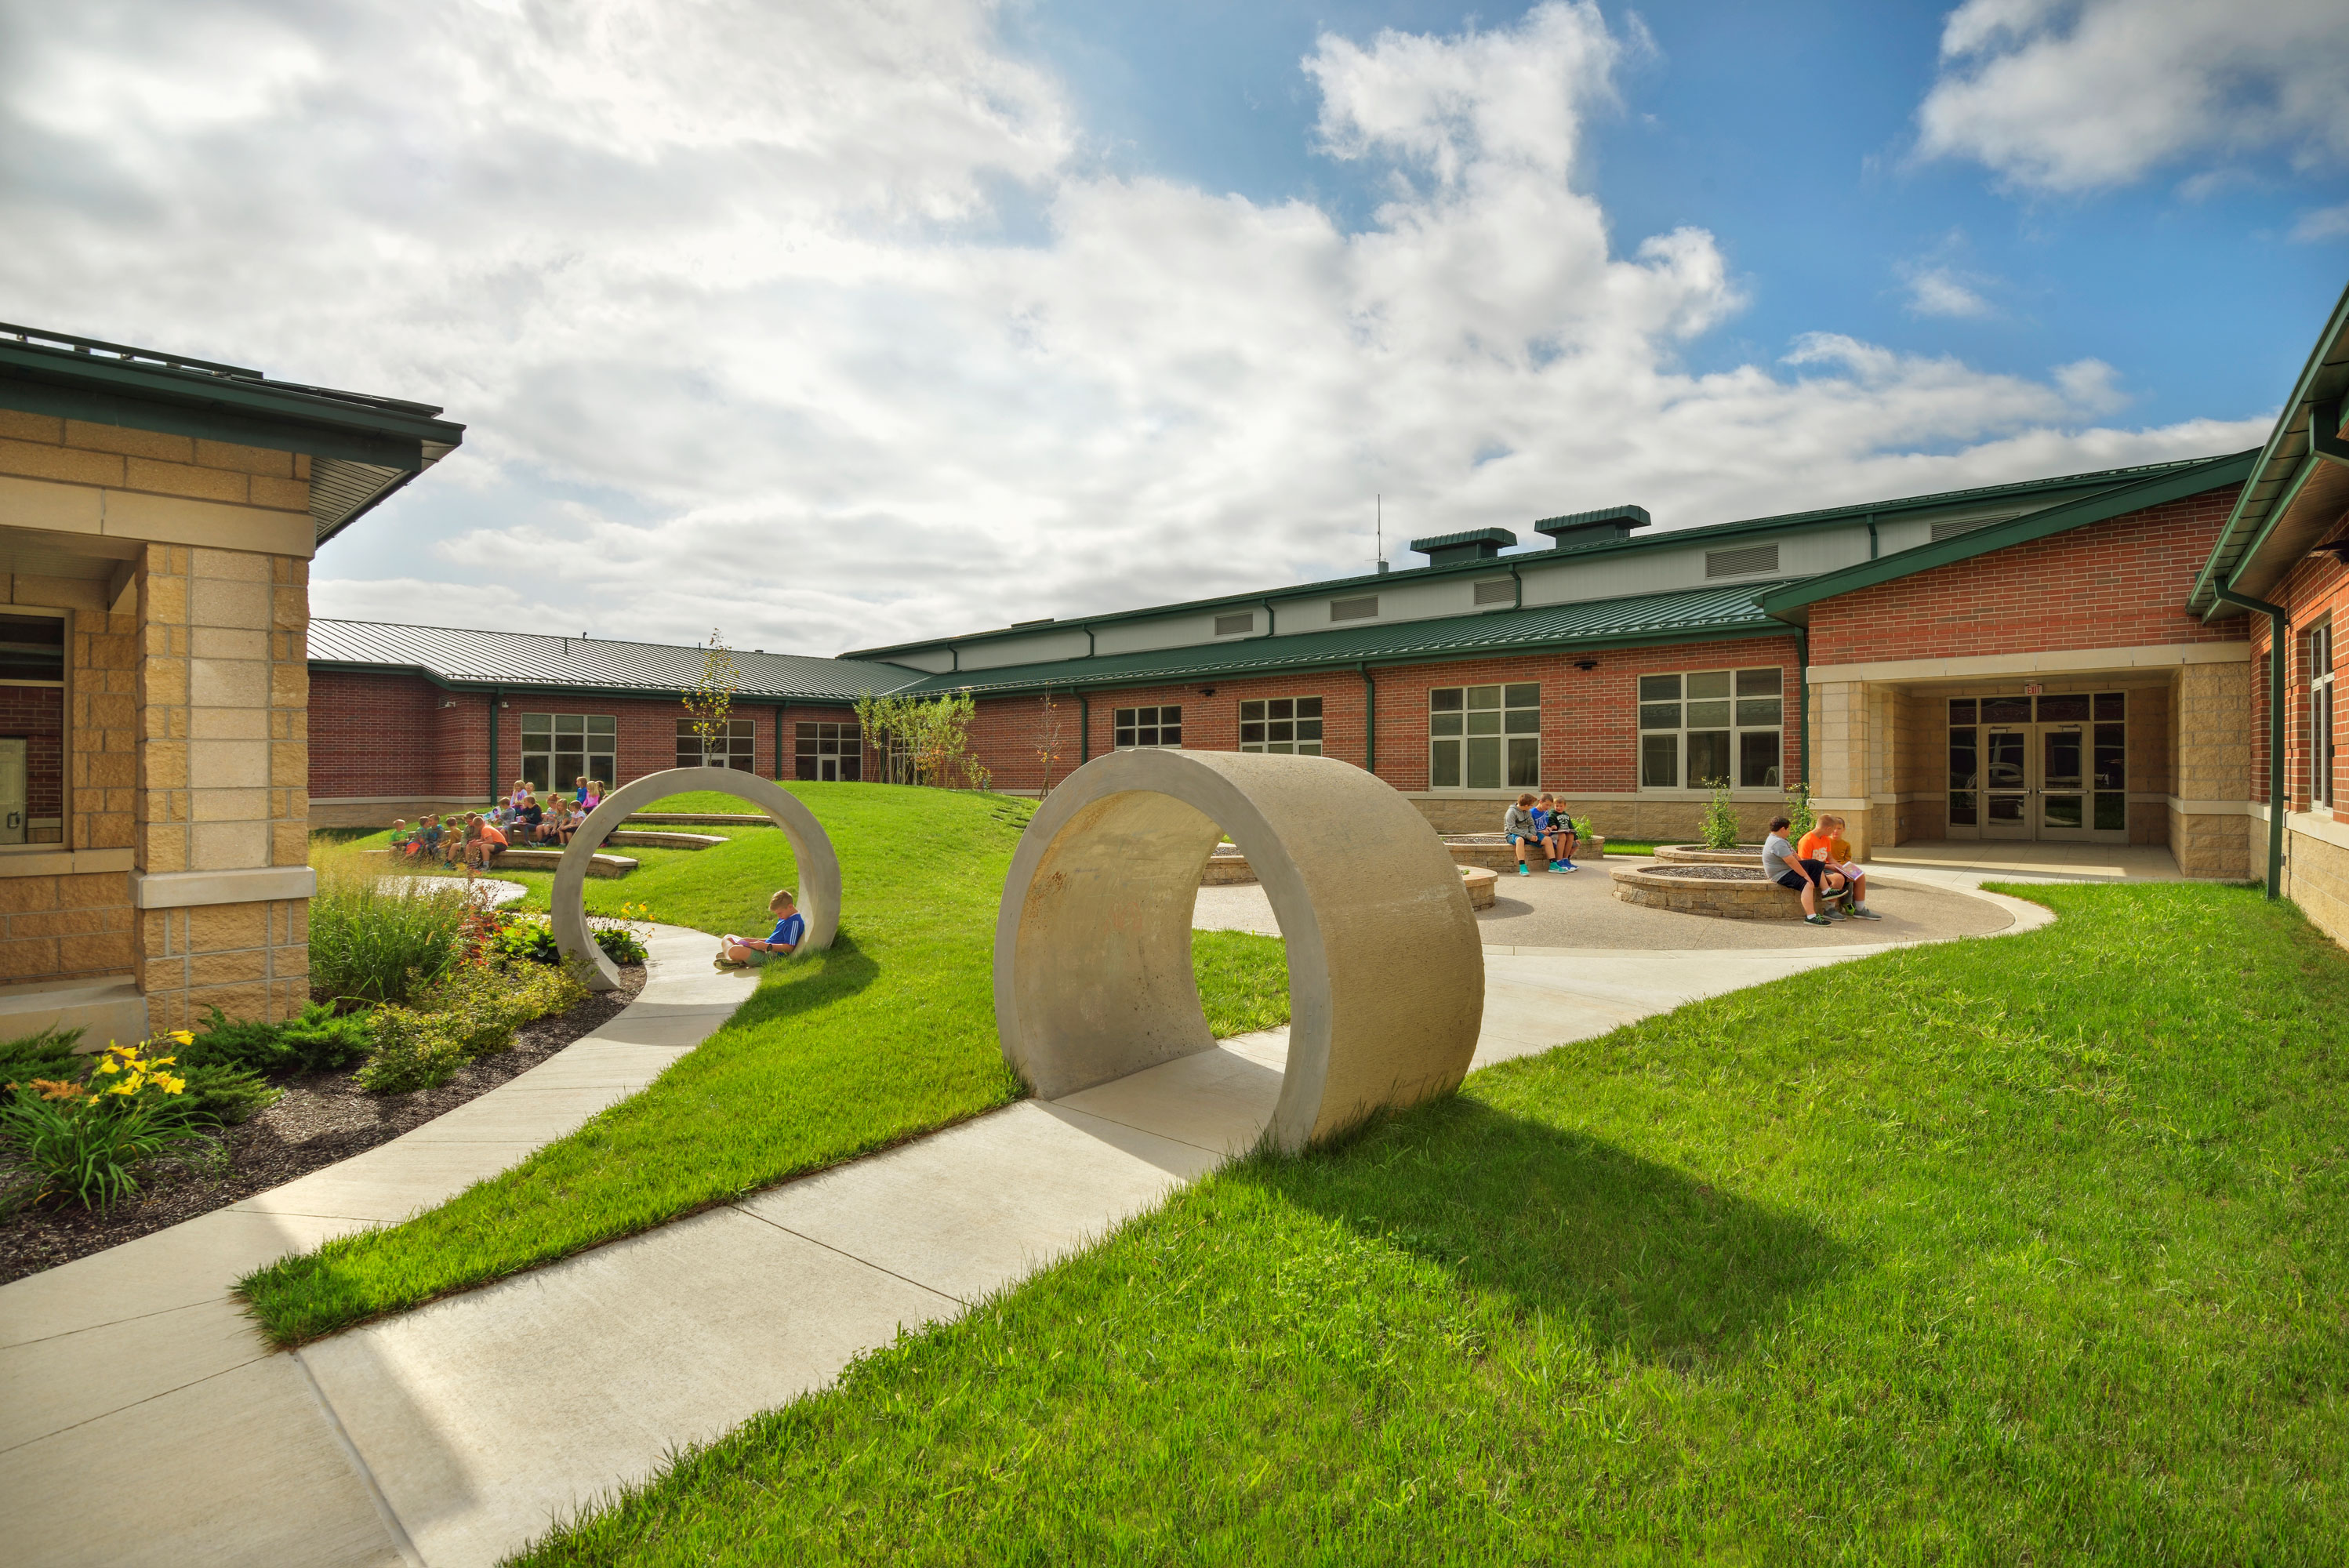 Greenville Elementary and Middle School